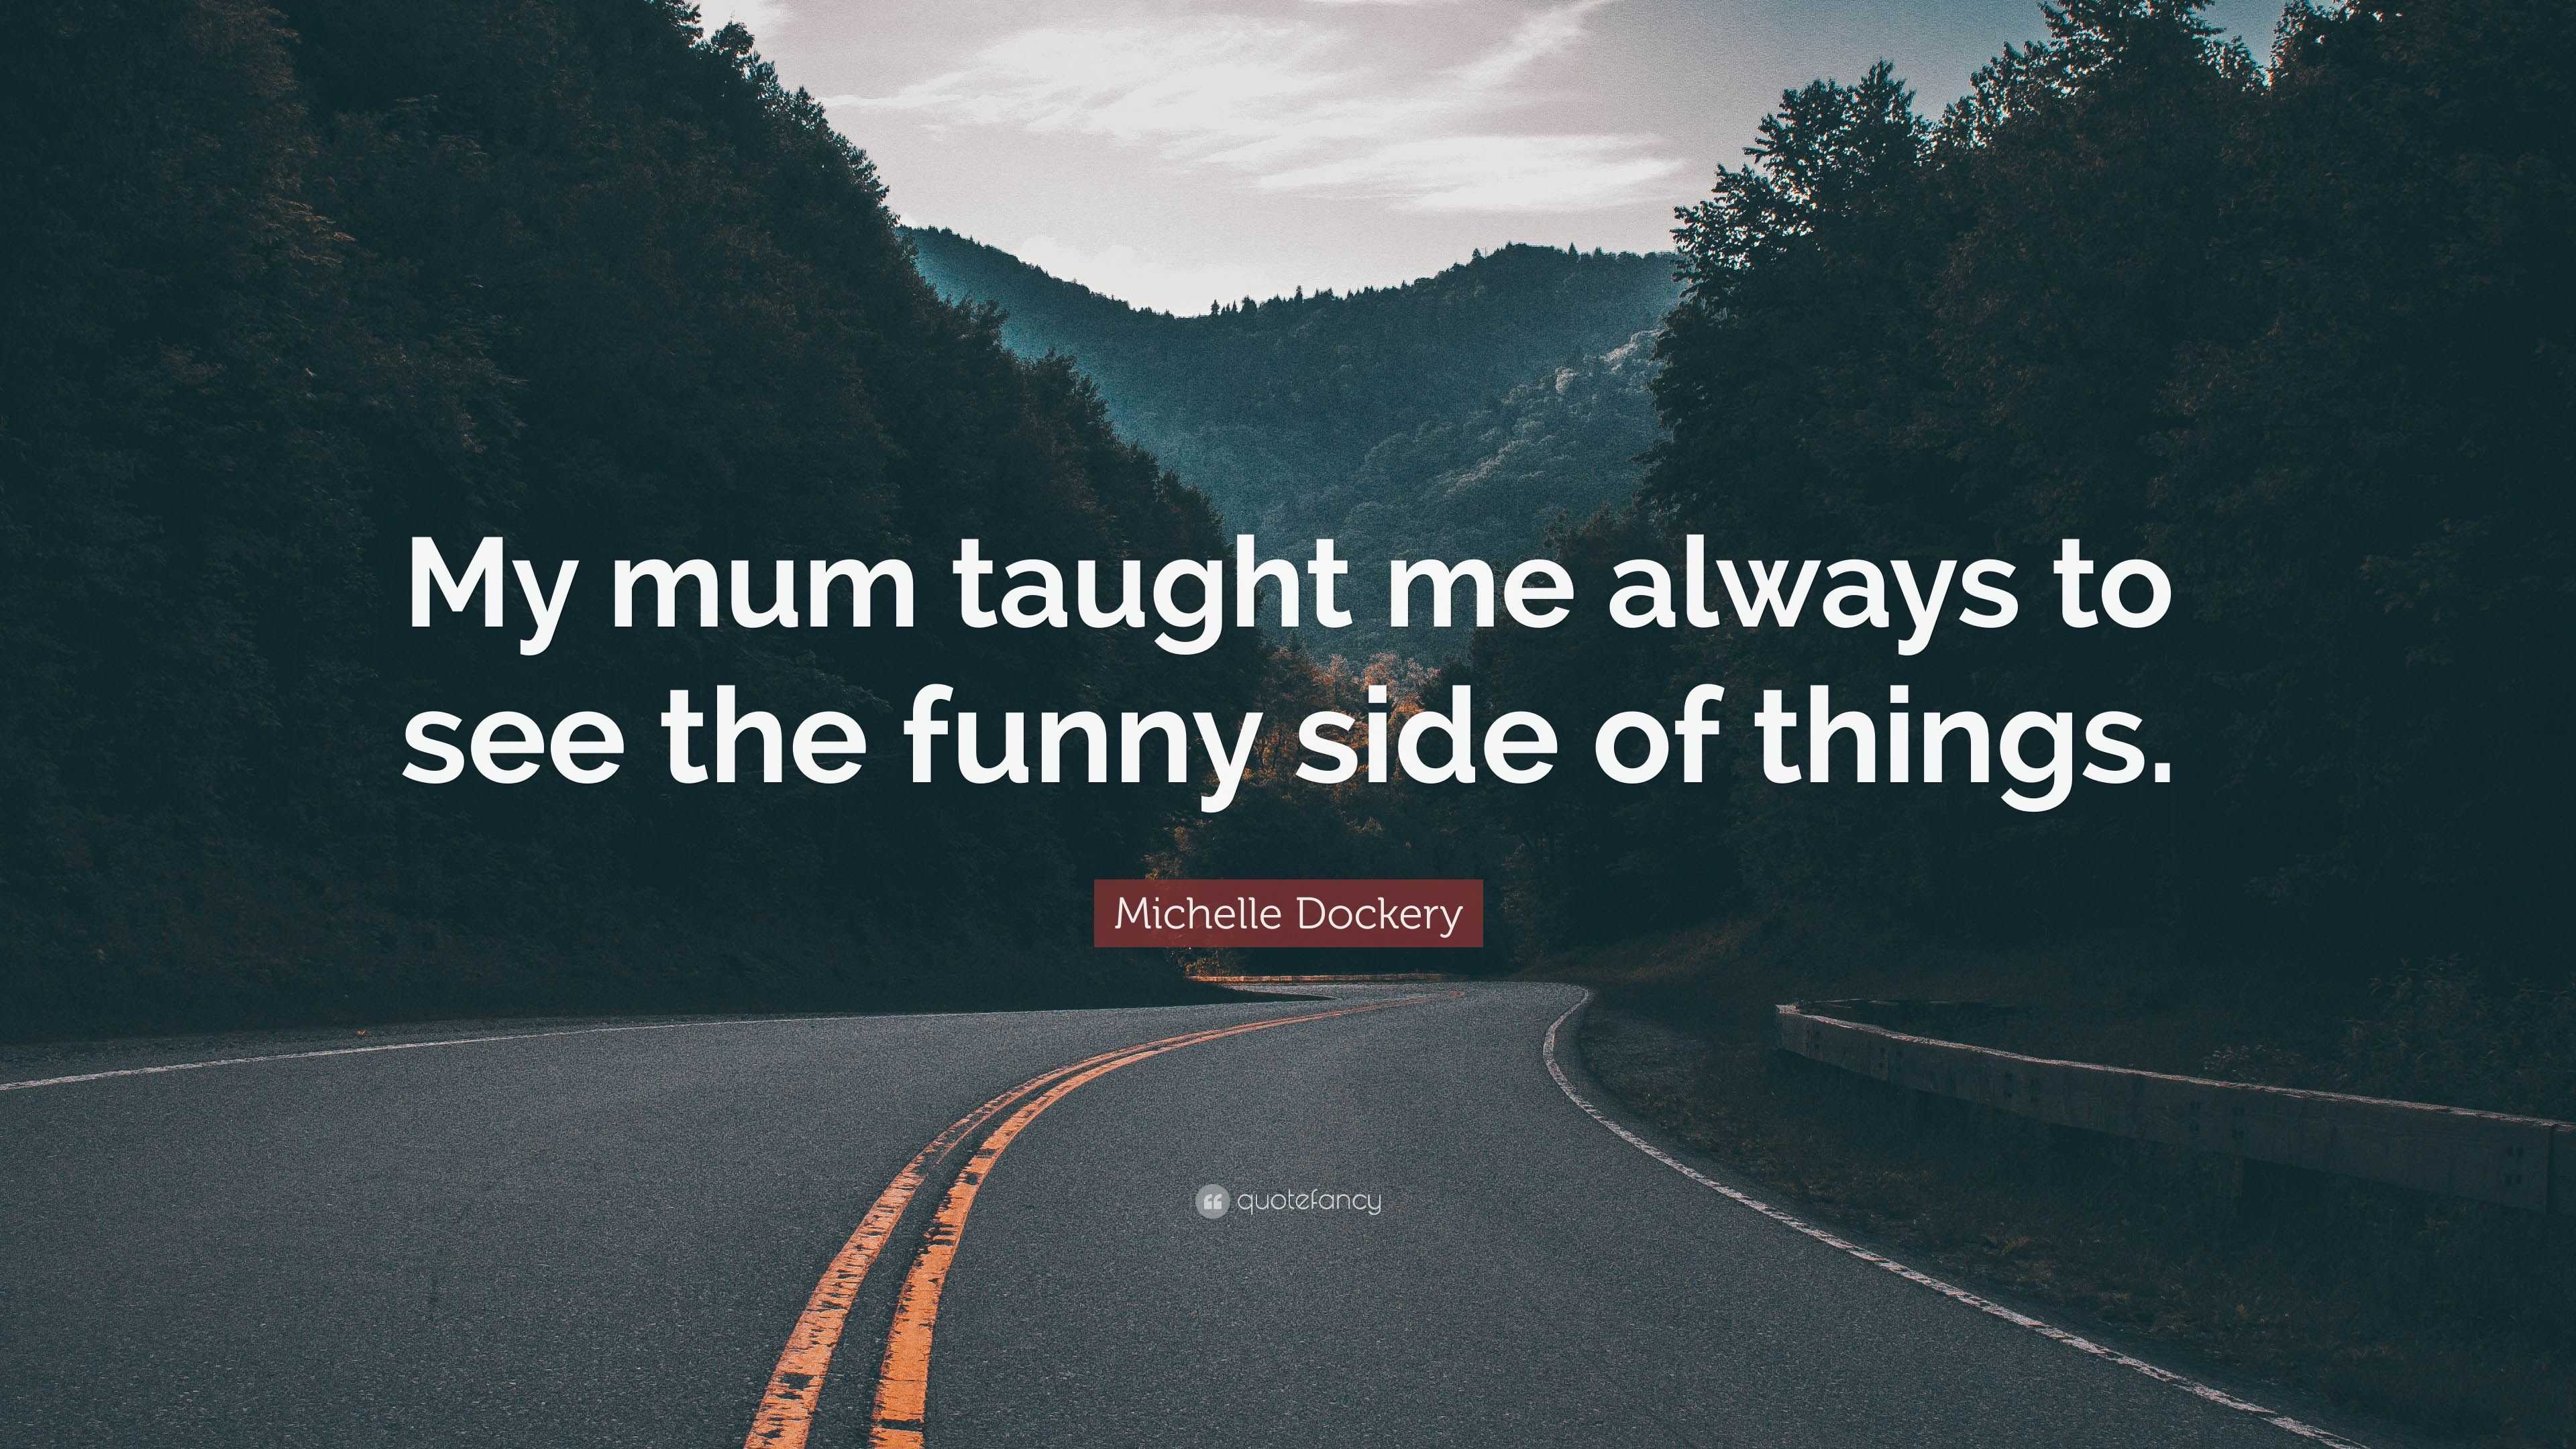 Michelle Dockery Quote: “My mum taught me always to see the funny side of  things.”